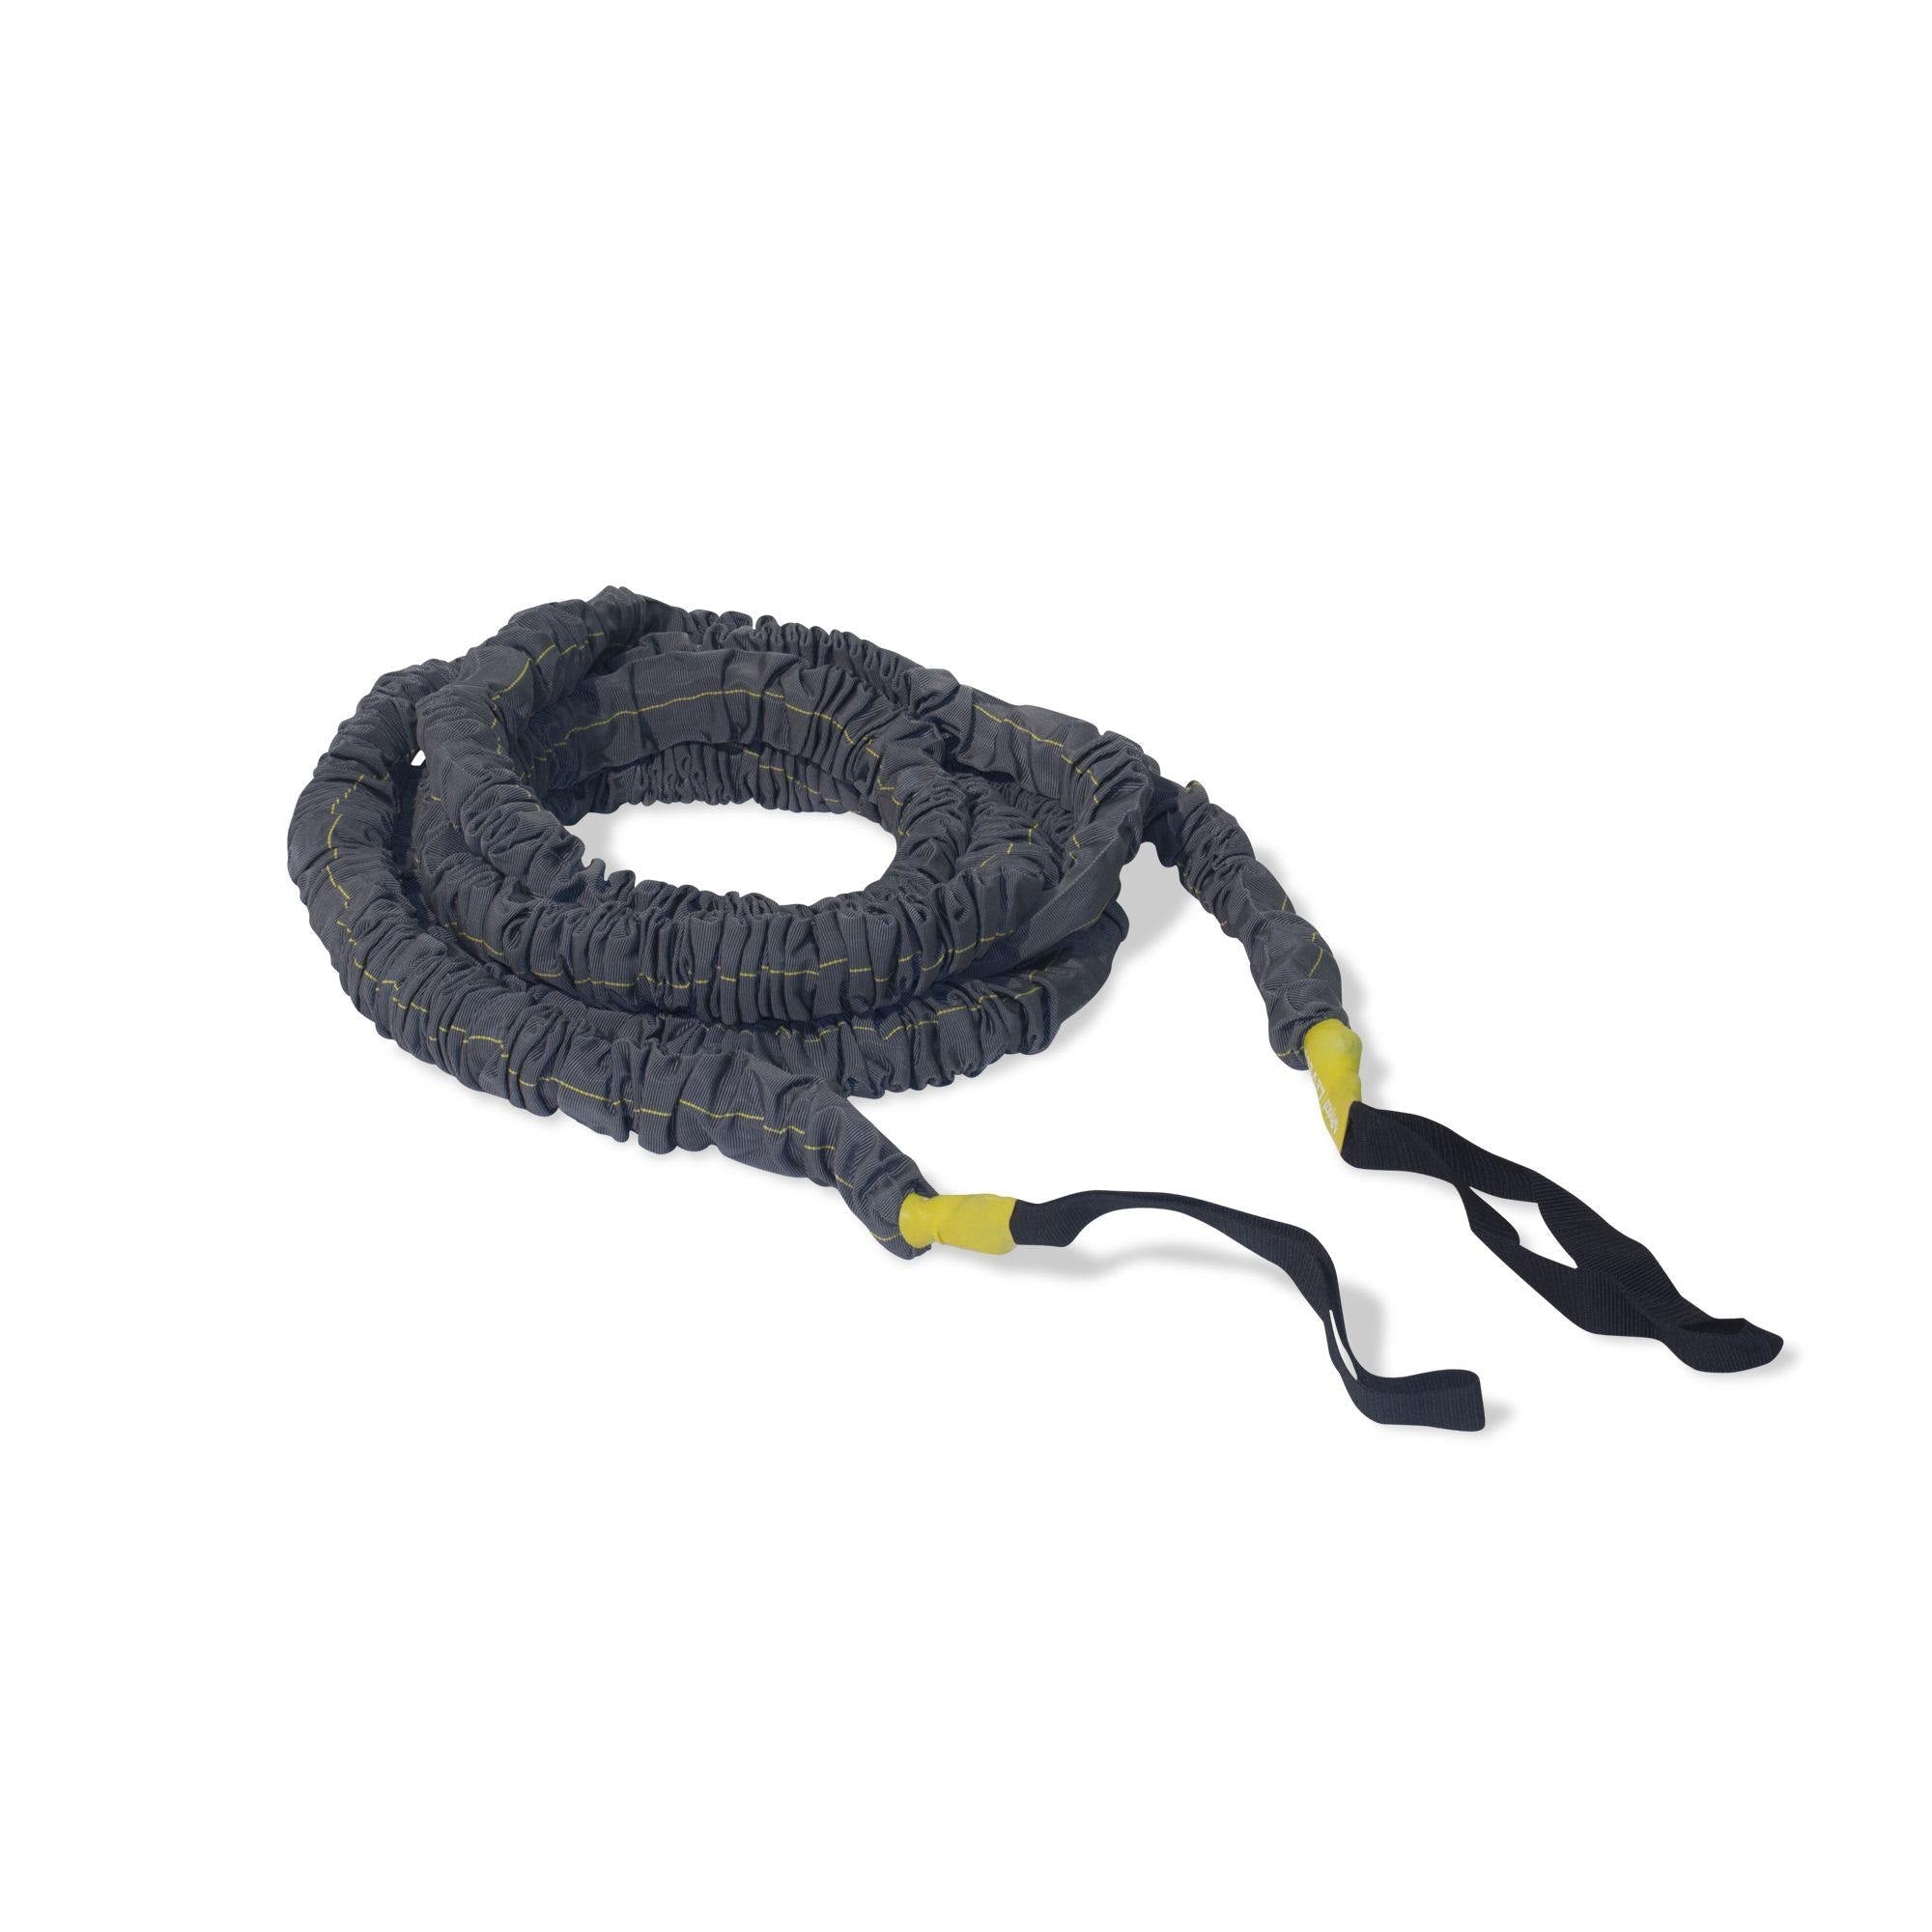 Physical Company HD Wave (Elasticated) Battle Ropes